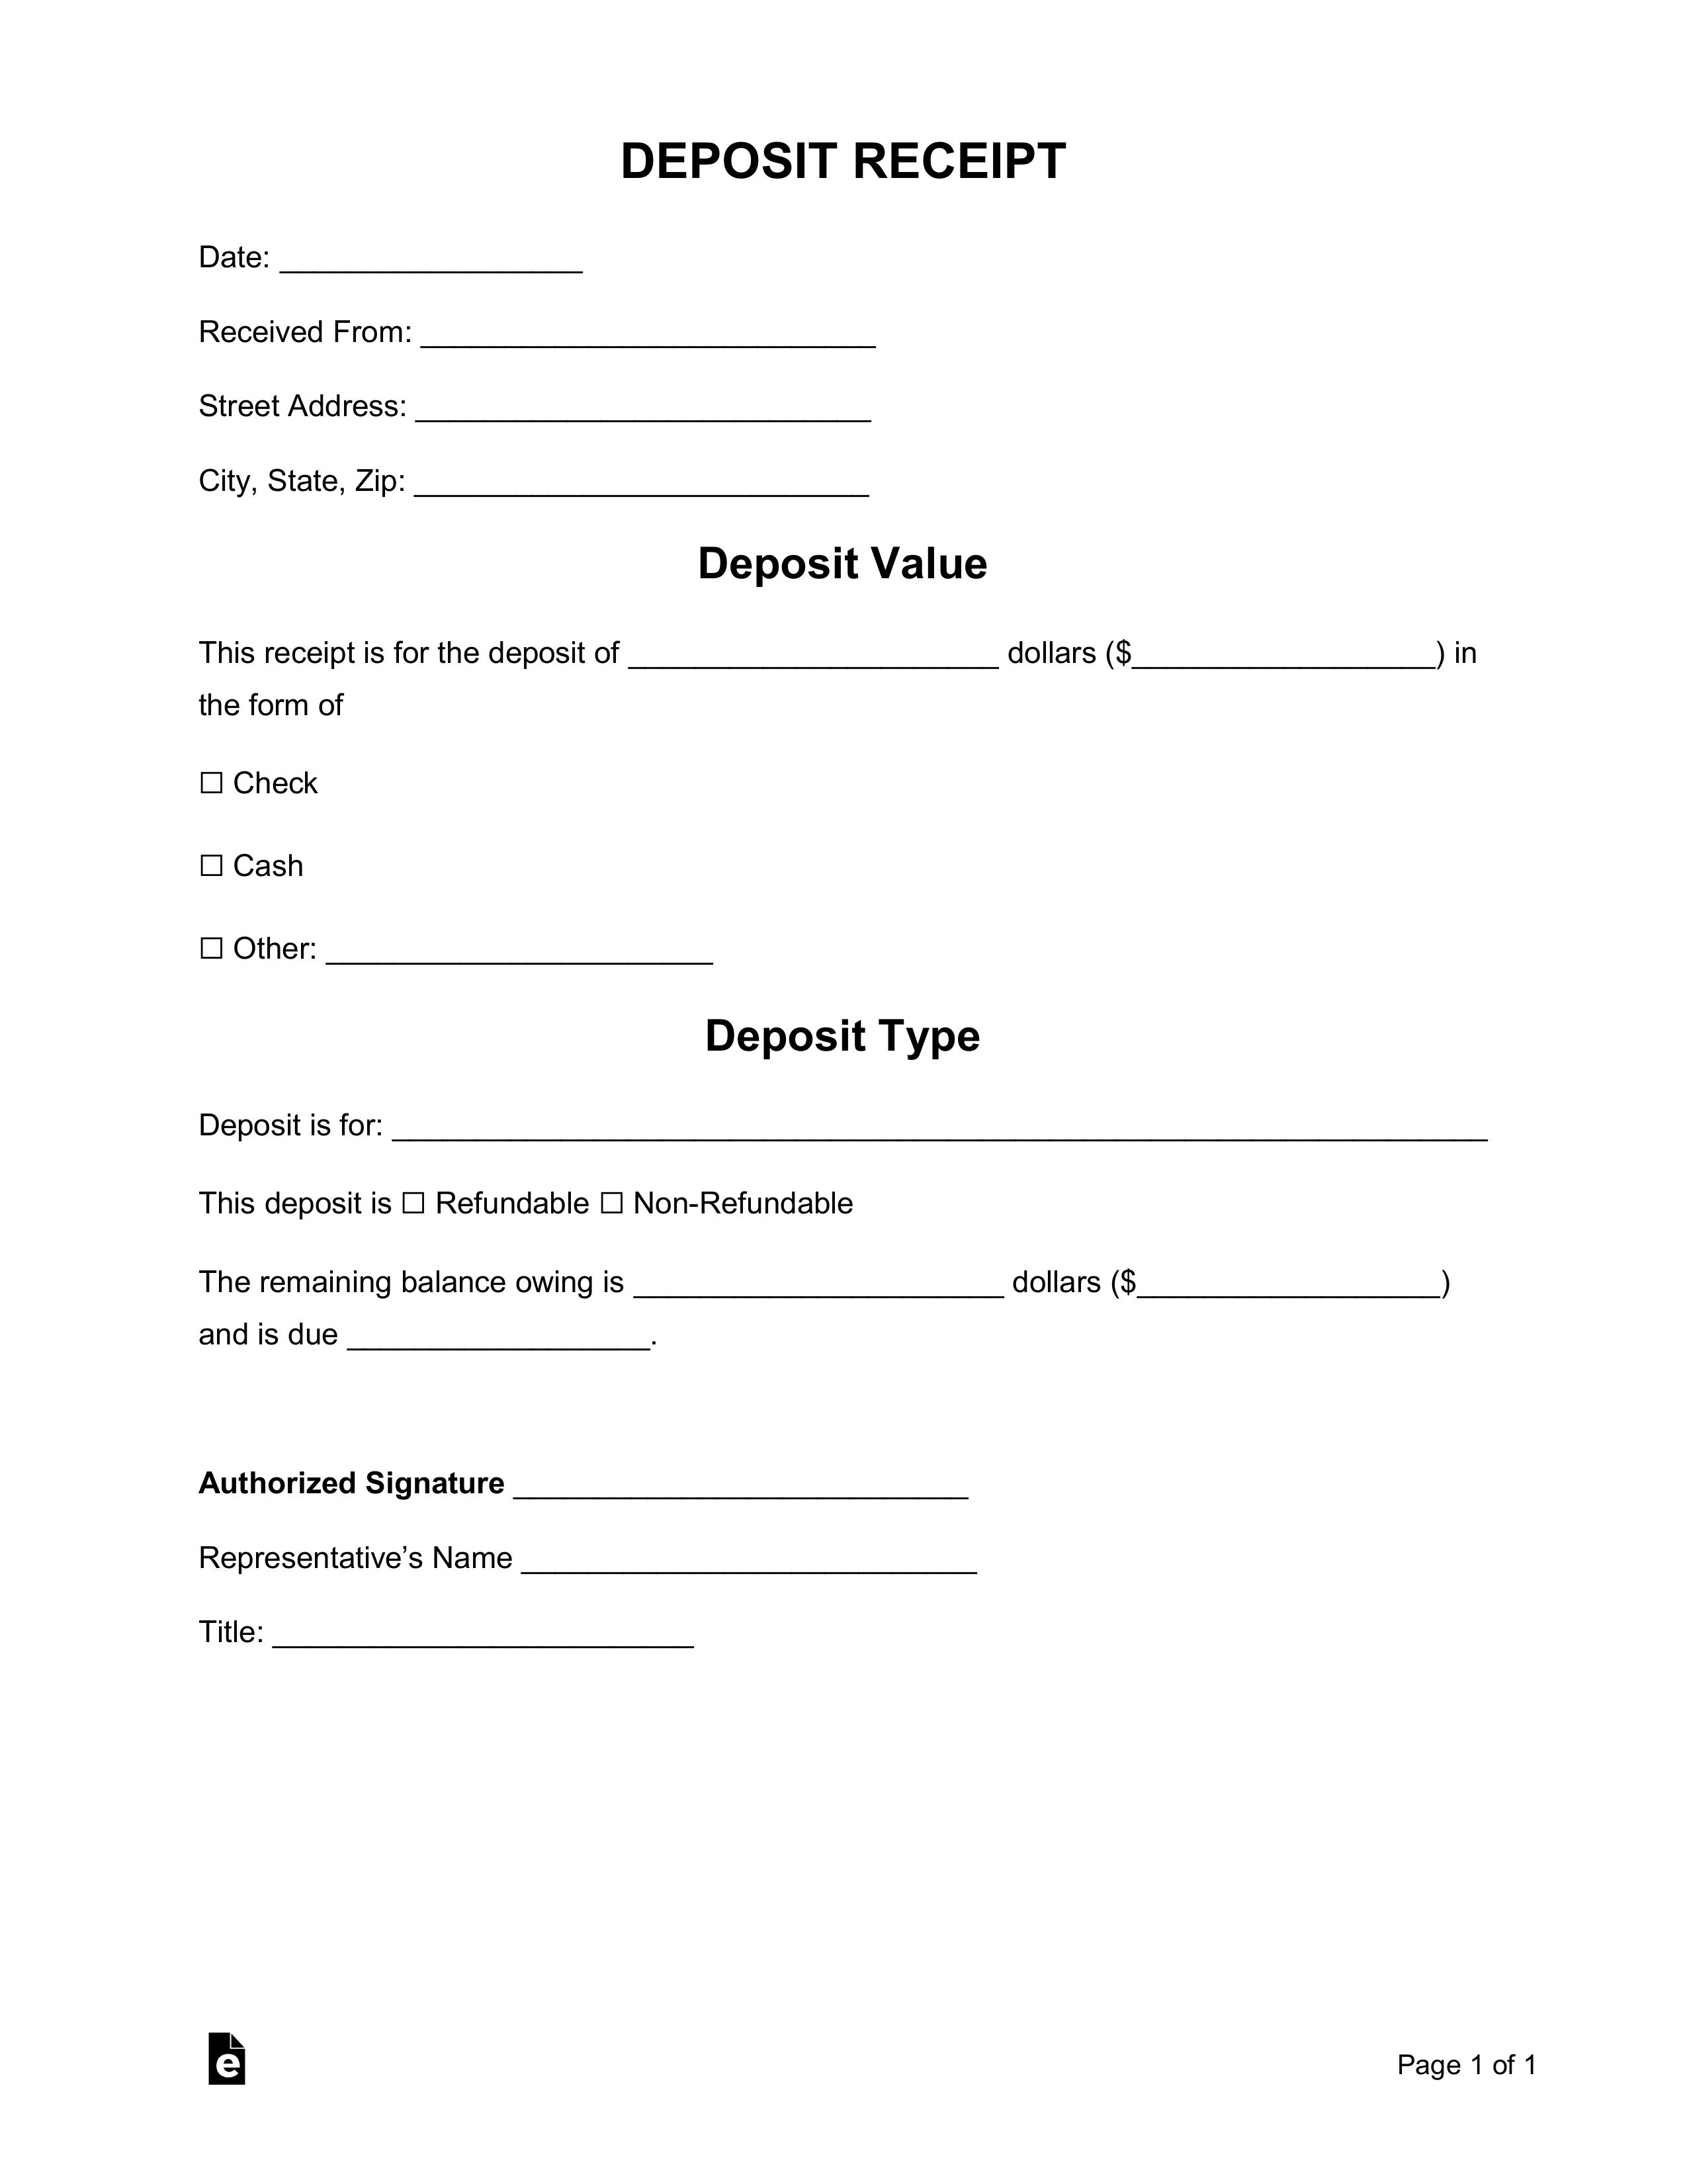 Free Deposit Receipt Templates - Word  PDF – eForms With Regard To Non Refundable Deposit Form Template Within Non Refundable Deposit Form Template